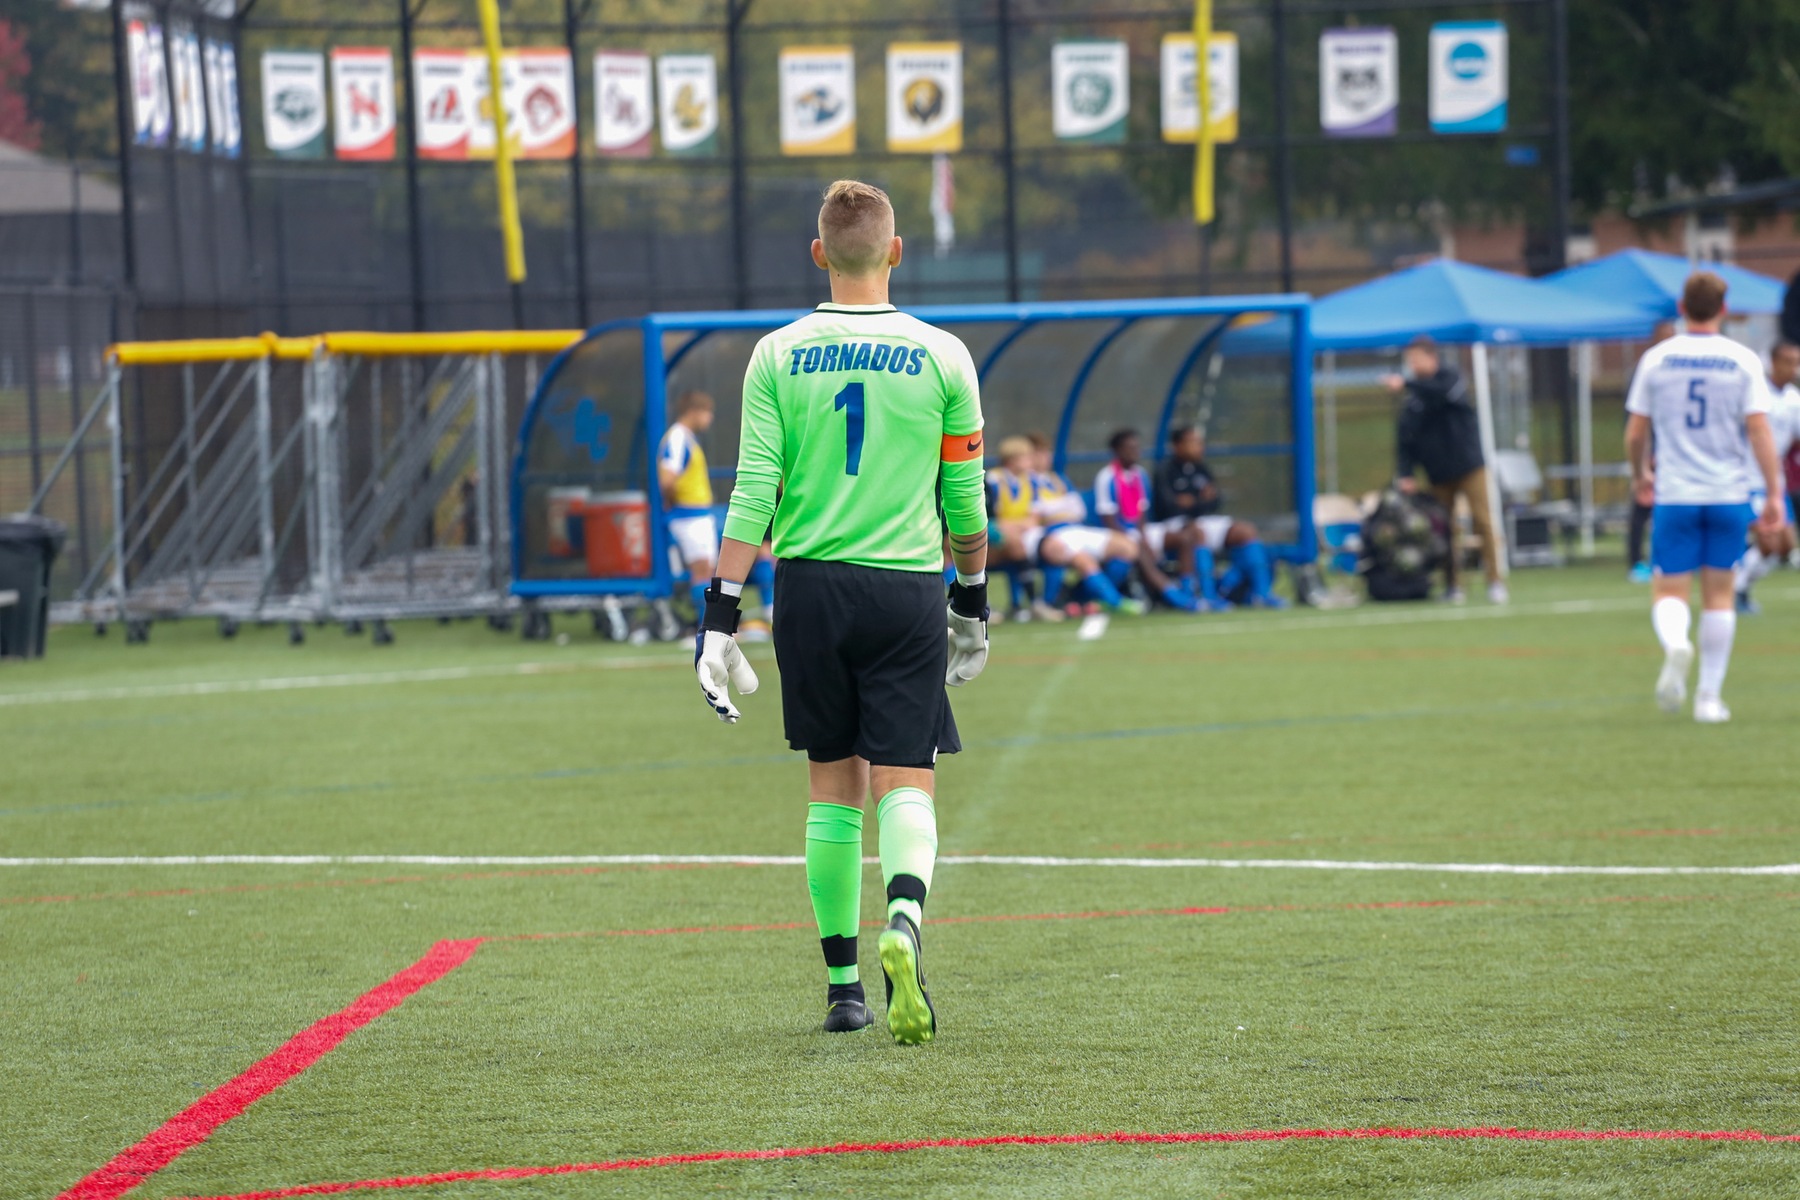 Senior goalkeeper Patrick Hall (pictured above) recorded 13 saves in Brevard's first-round match in the 2019 ECAC DIII Men's Soccer Championships (Photo courtesy of Victoria Brayman '22).